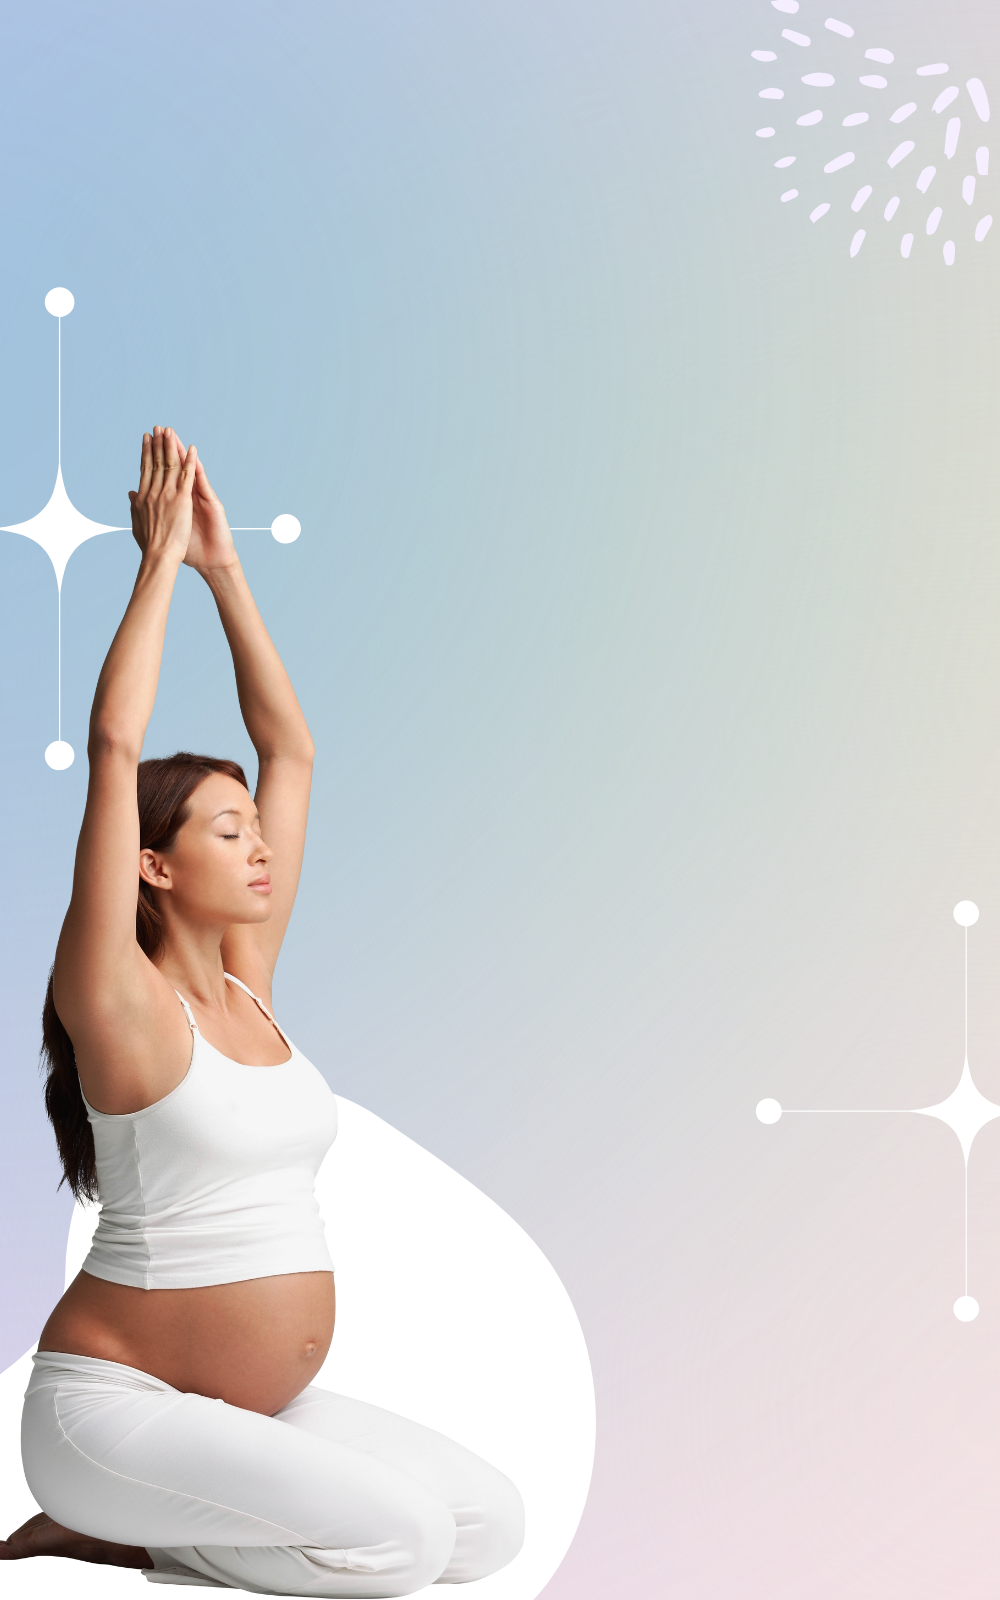 Photo of pregnant woman stretching over colorful background